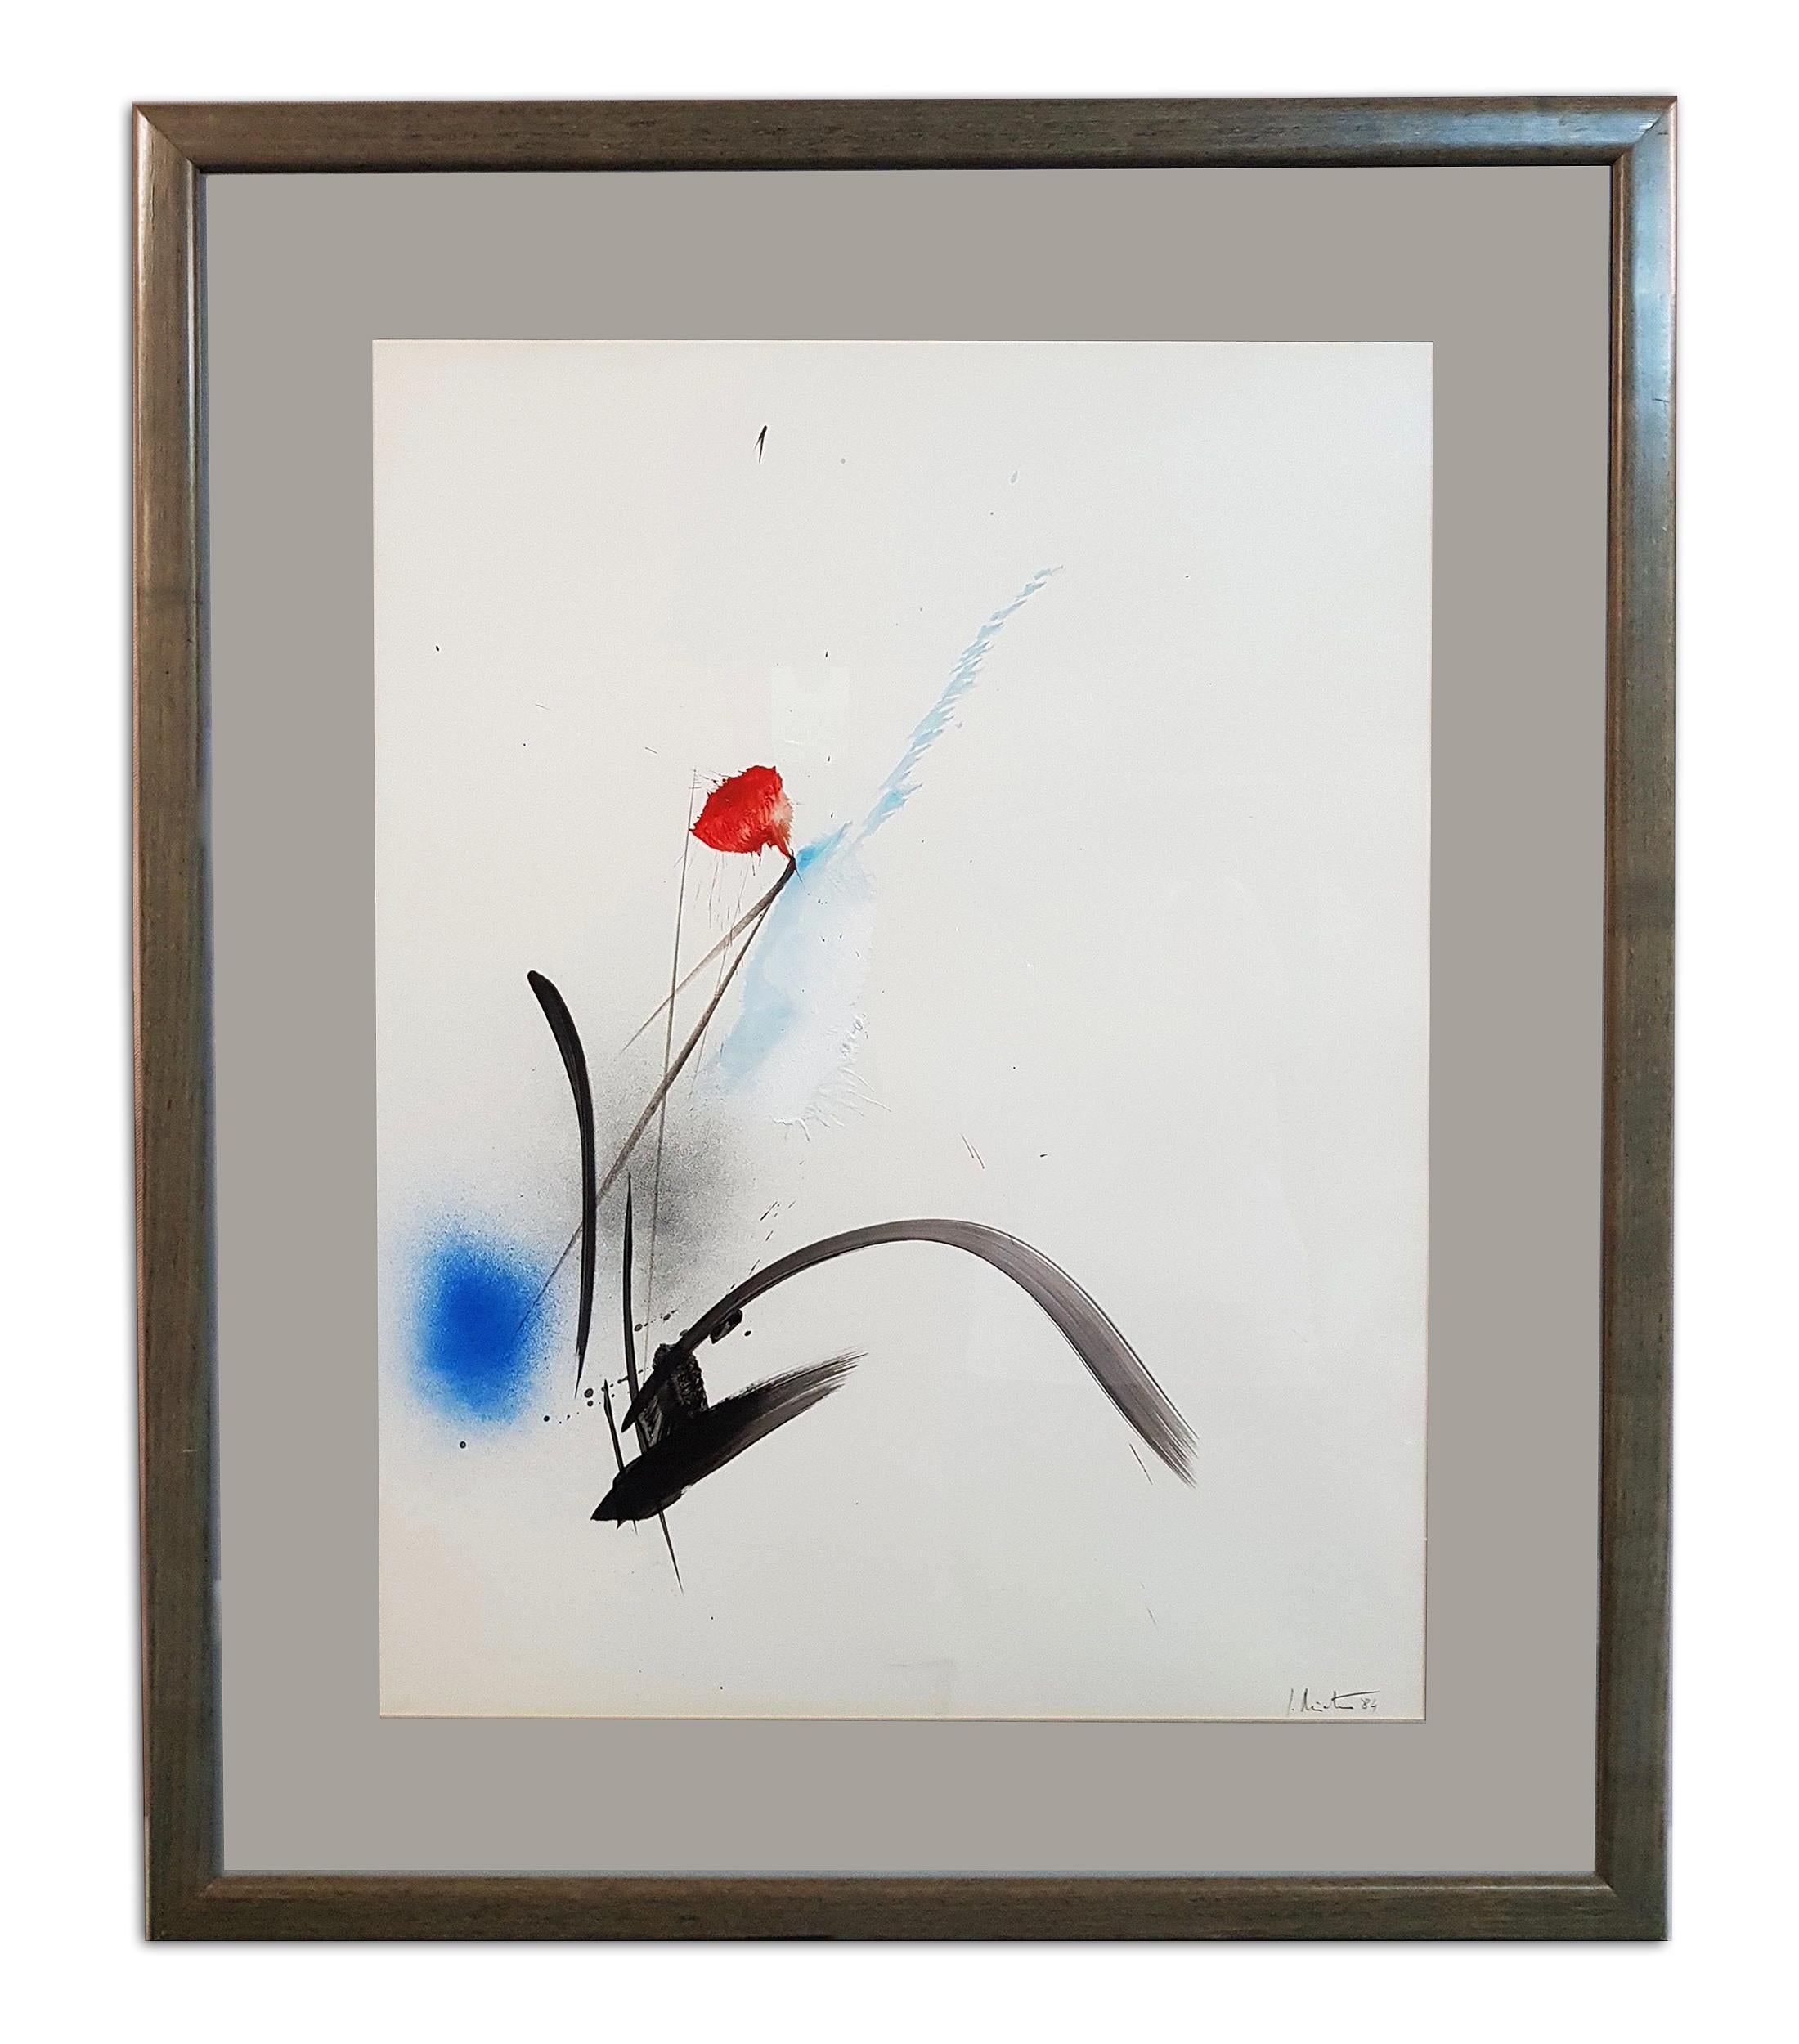 Jean Miotte (1926-2016)

Oil & Gouache on paper depicting a flower.
Signed lower right and dated 84.
Matted and framed
Measurements:
H. 25